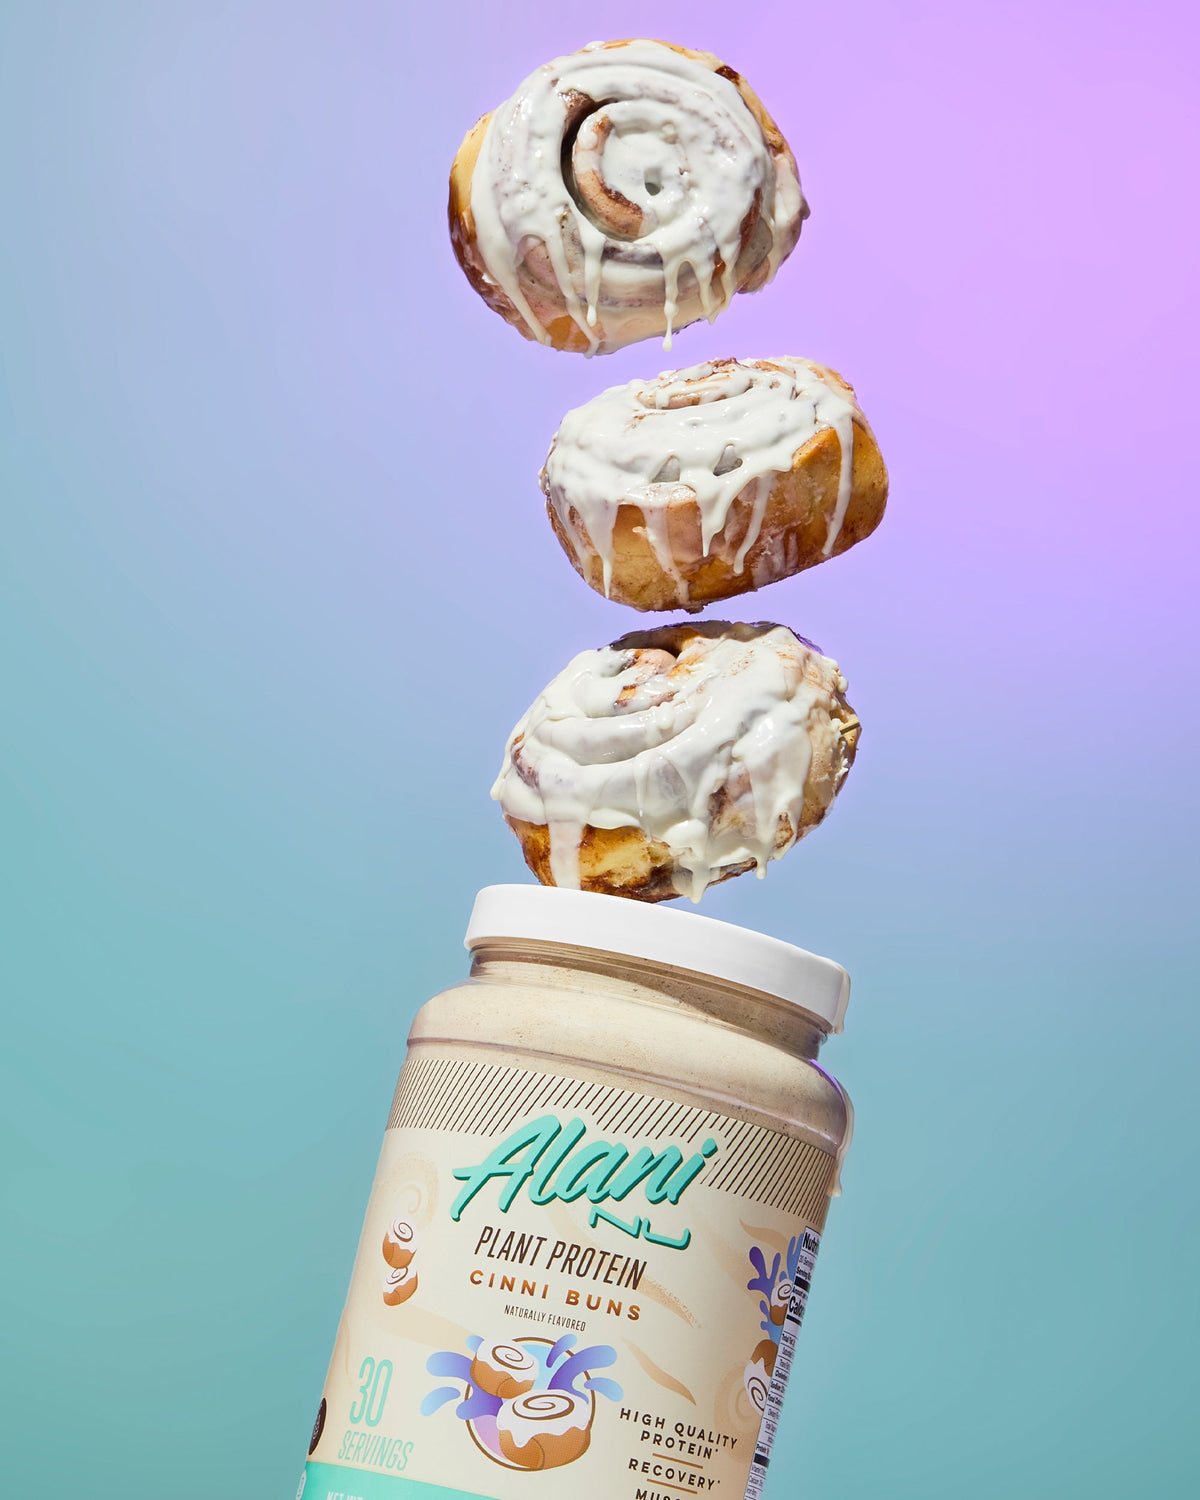 Plant Protein in Cinni Buns flavor with falling cinnamon rolls into the air.